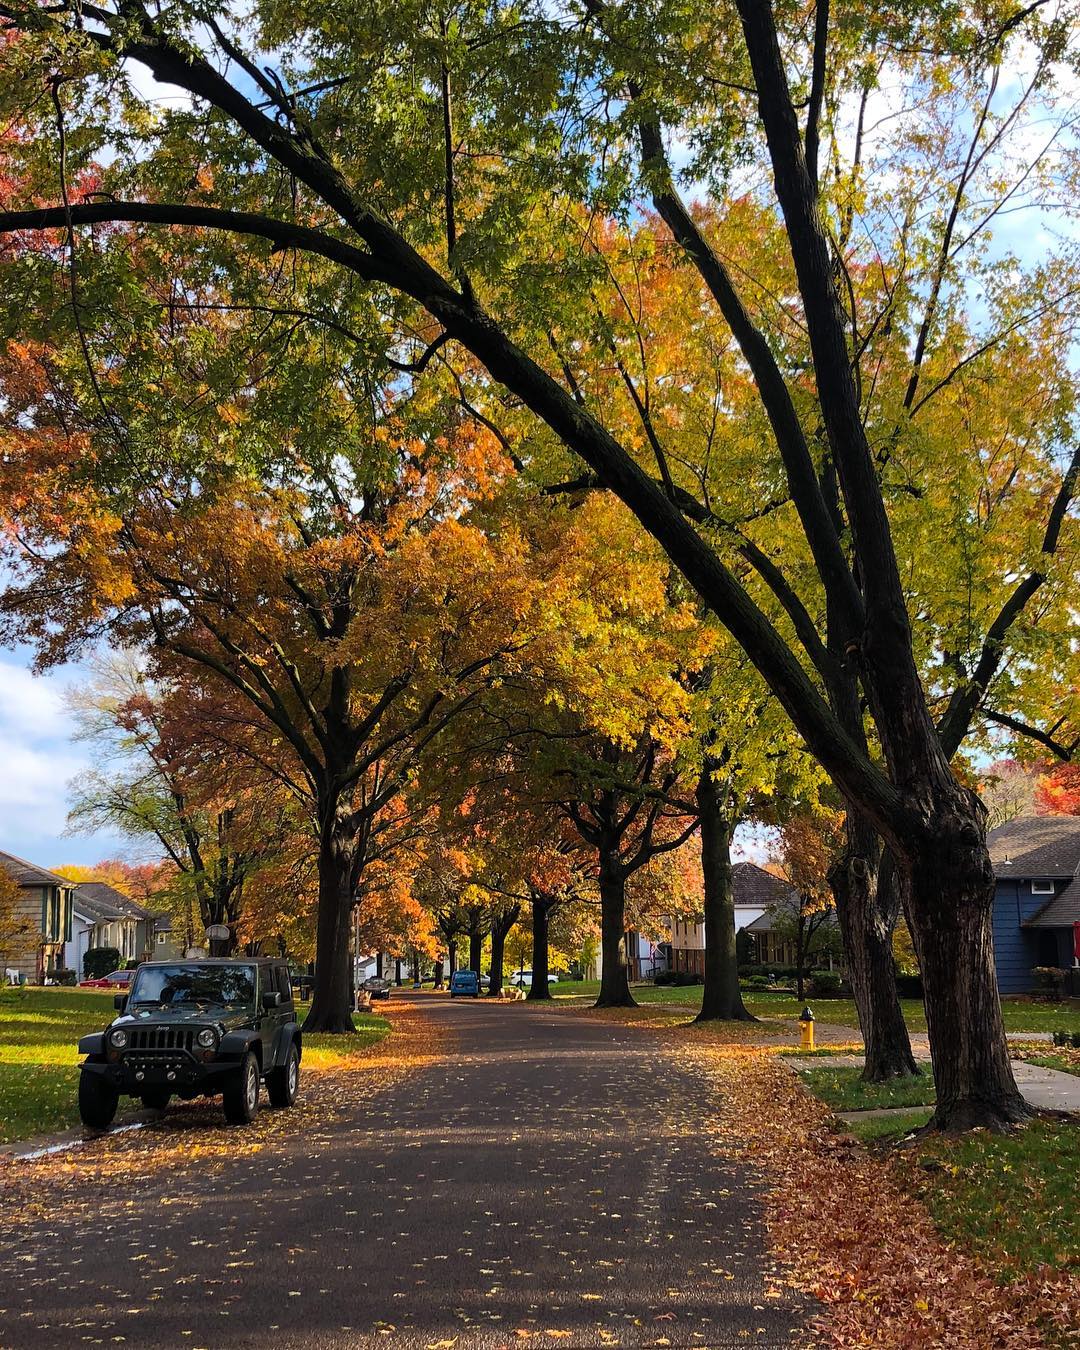 Trees dropping leaves on street in Overland Park photo by Instagram user @katie_minion